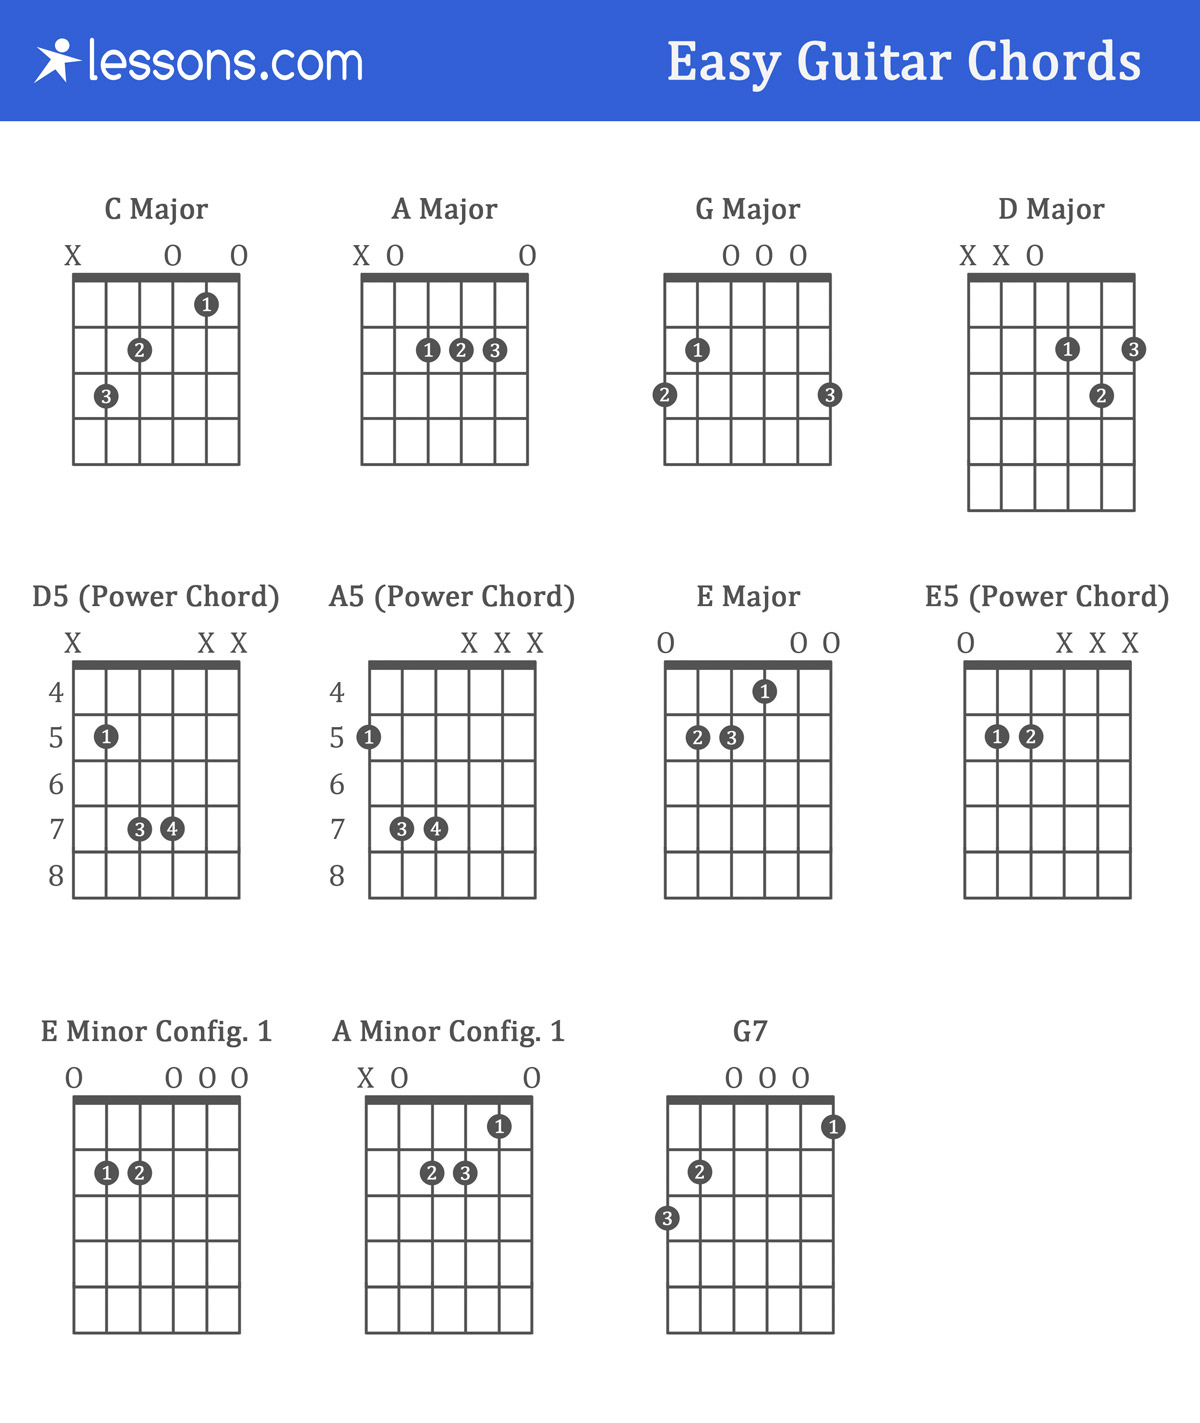 Easy Guitar Chords The 11 Easy Guitar Chords For Beginners With Charts Examples